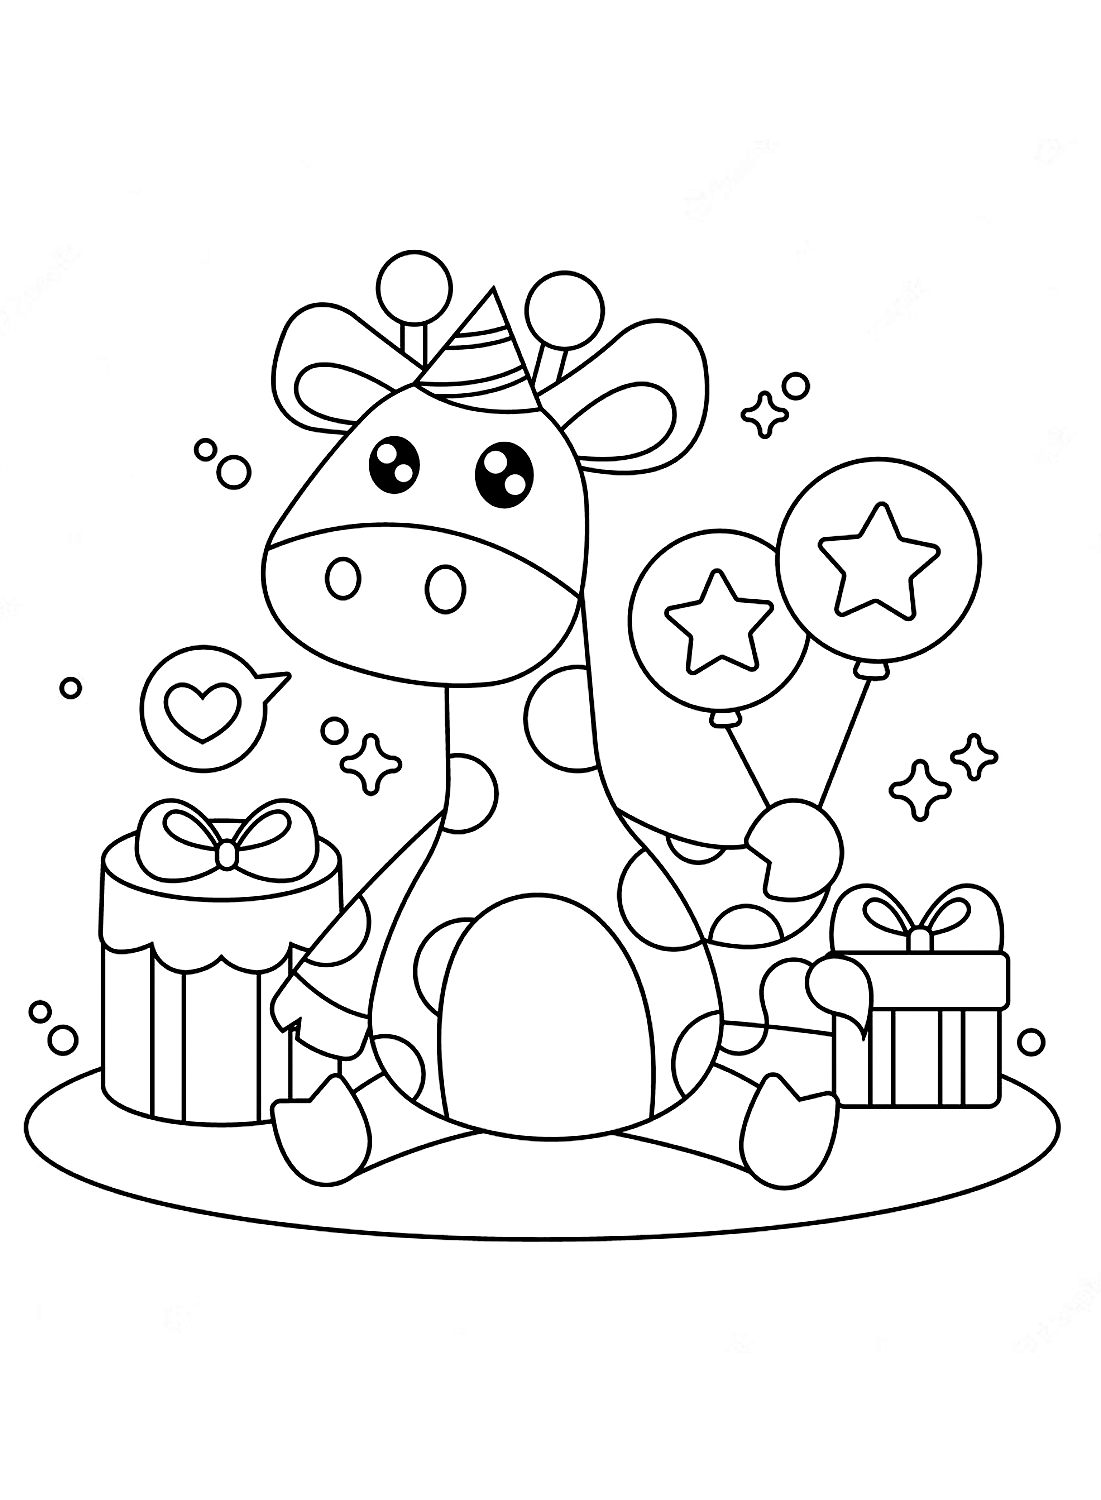 Coloring Pages of a Giraffe and gifts from Giraffes